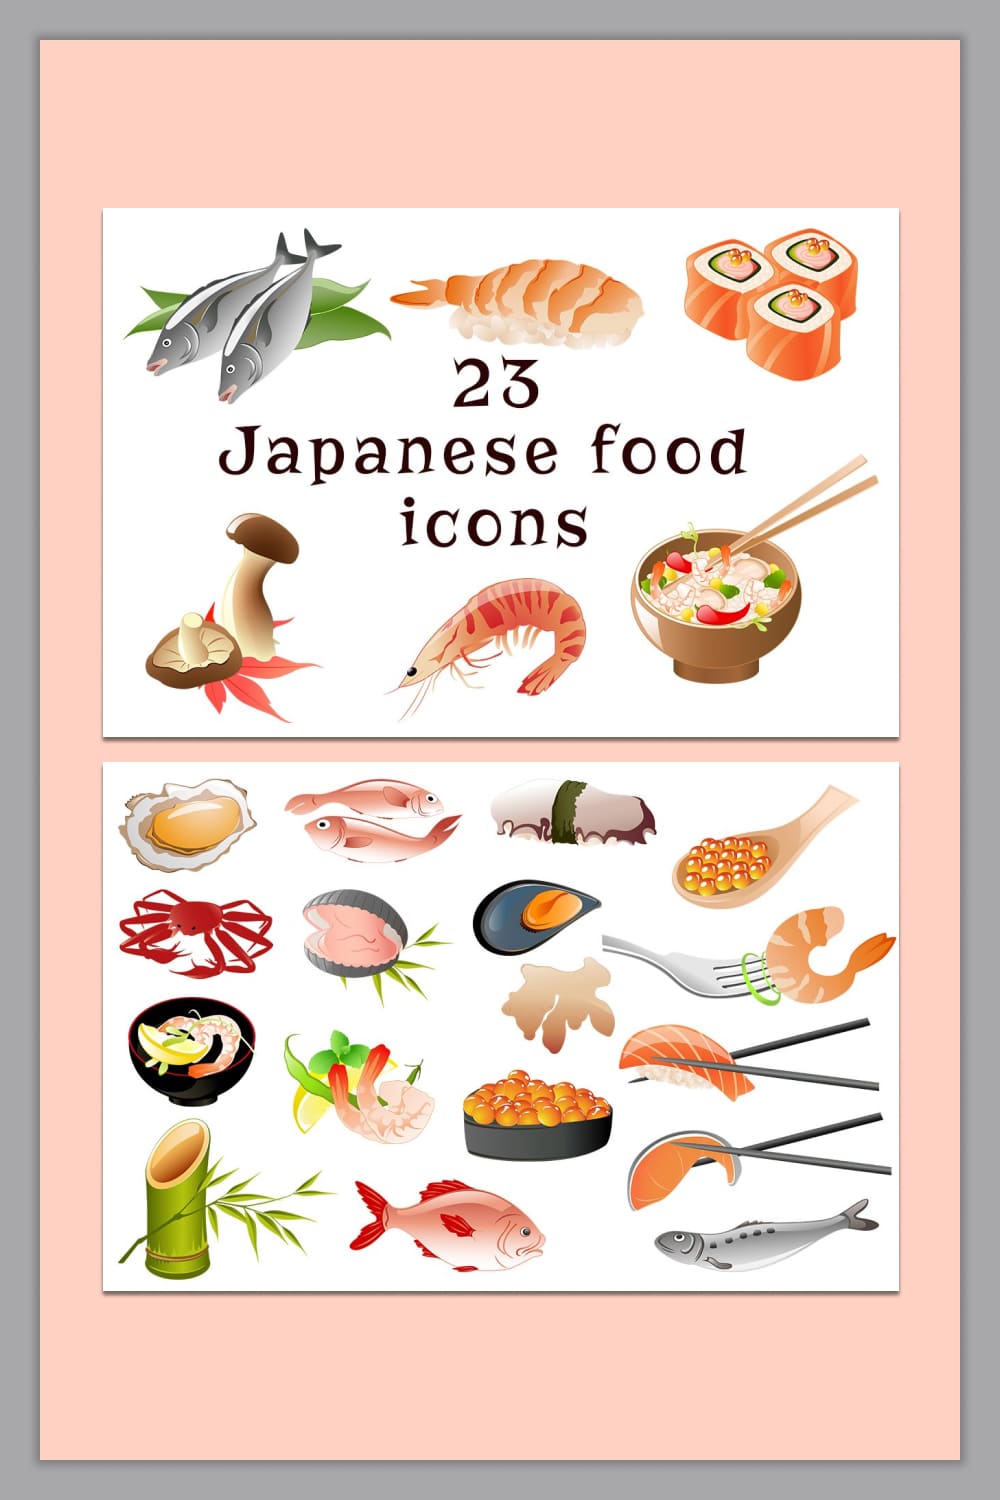 Japanese food icons - pinterest image preview.